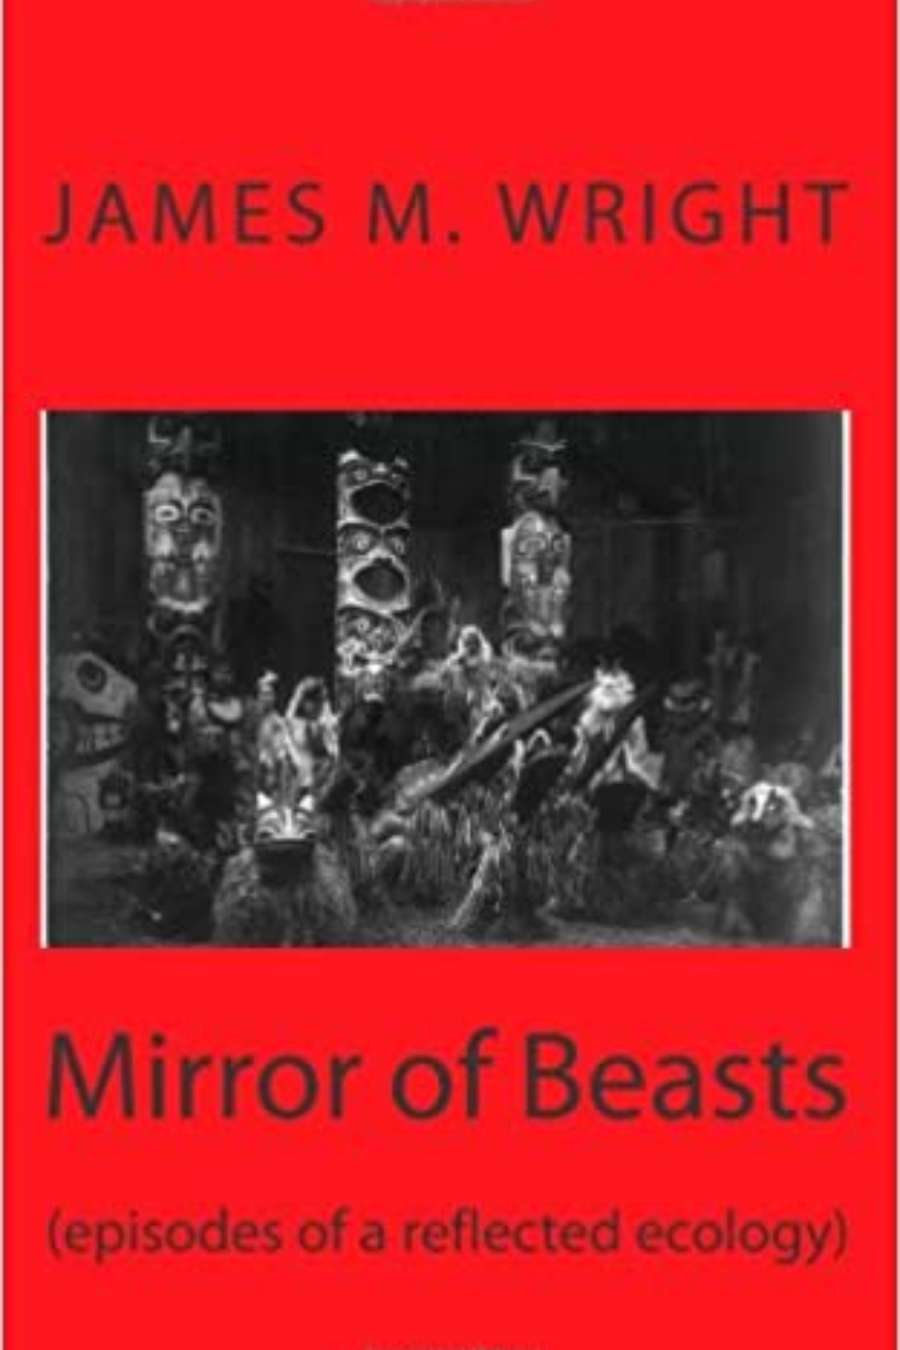 mirror-of-beasts-episodes-of-a-reflected-ecology Image